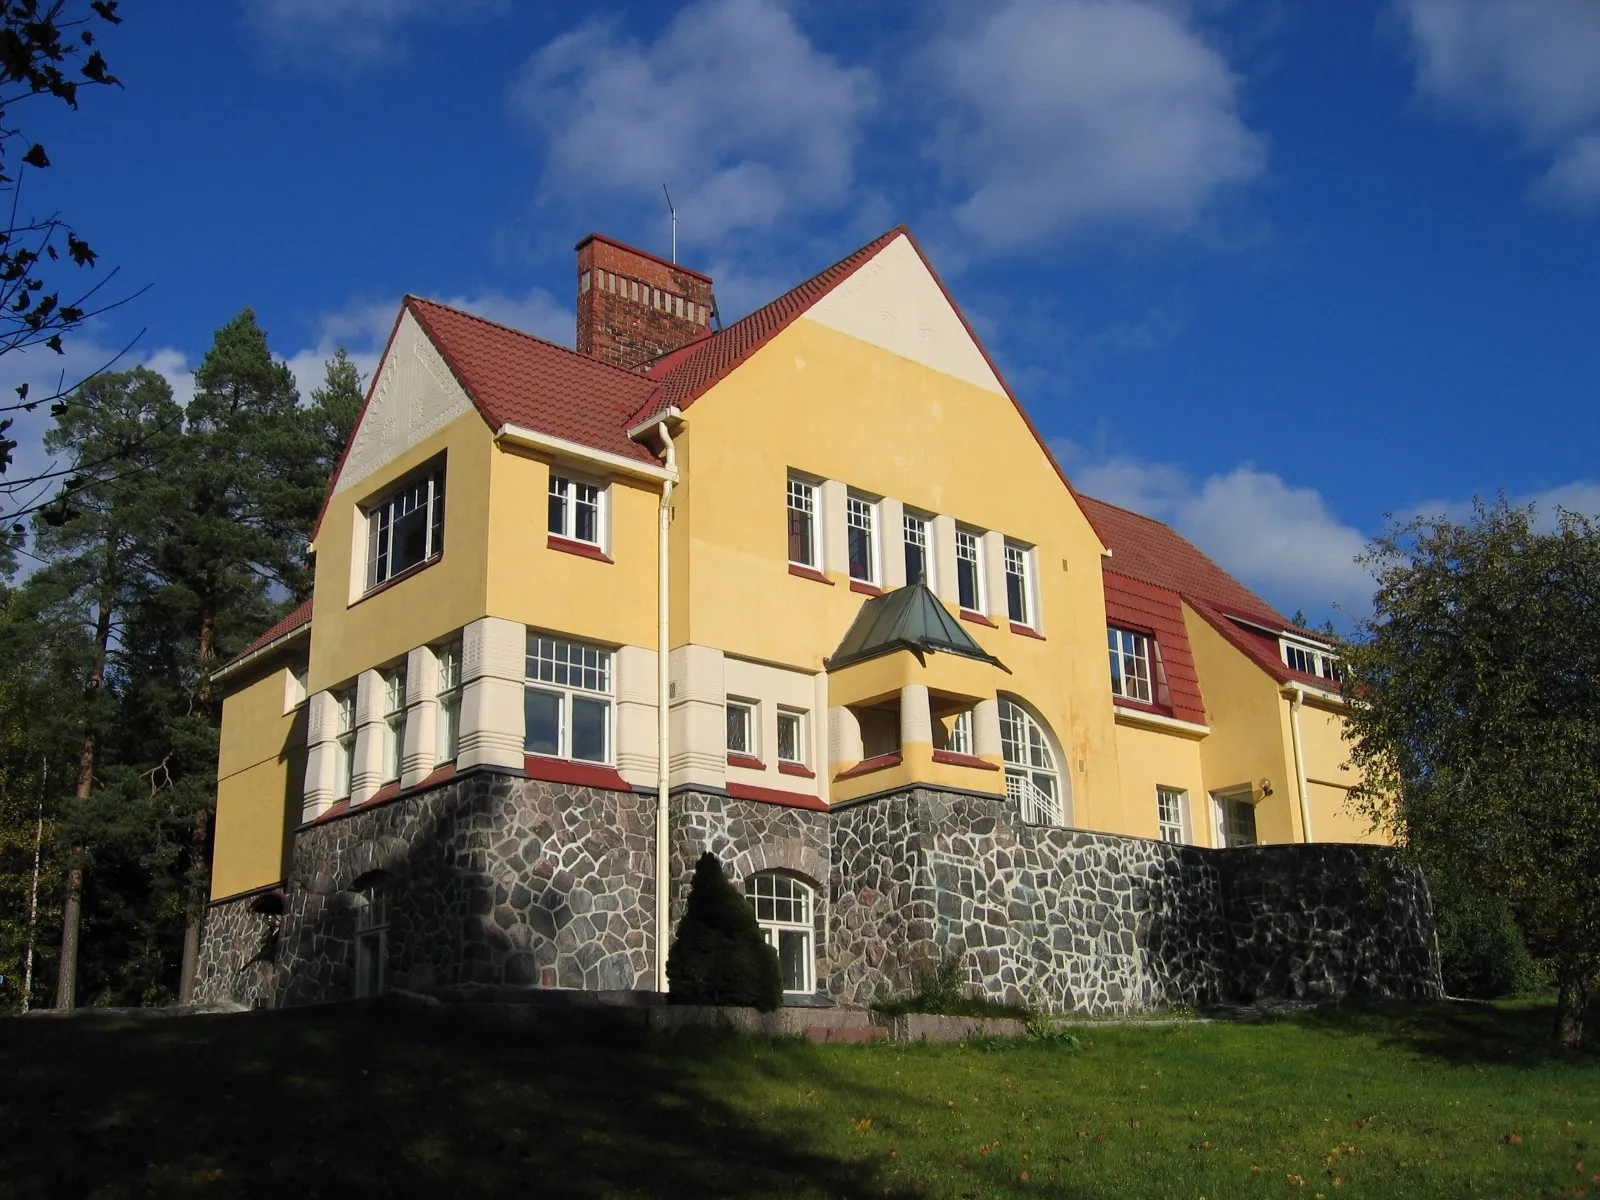 Photo showing: Villa Vallmogård in Kauniainen, Finland. The building is used for cultural events. Originally built as private home of writer Mikael Lybeck (1864-1925)